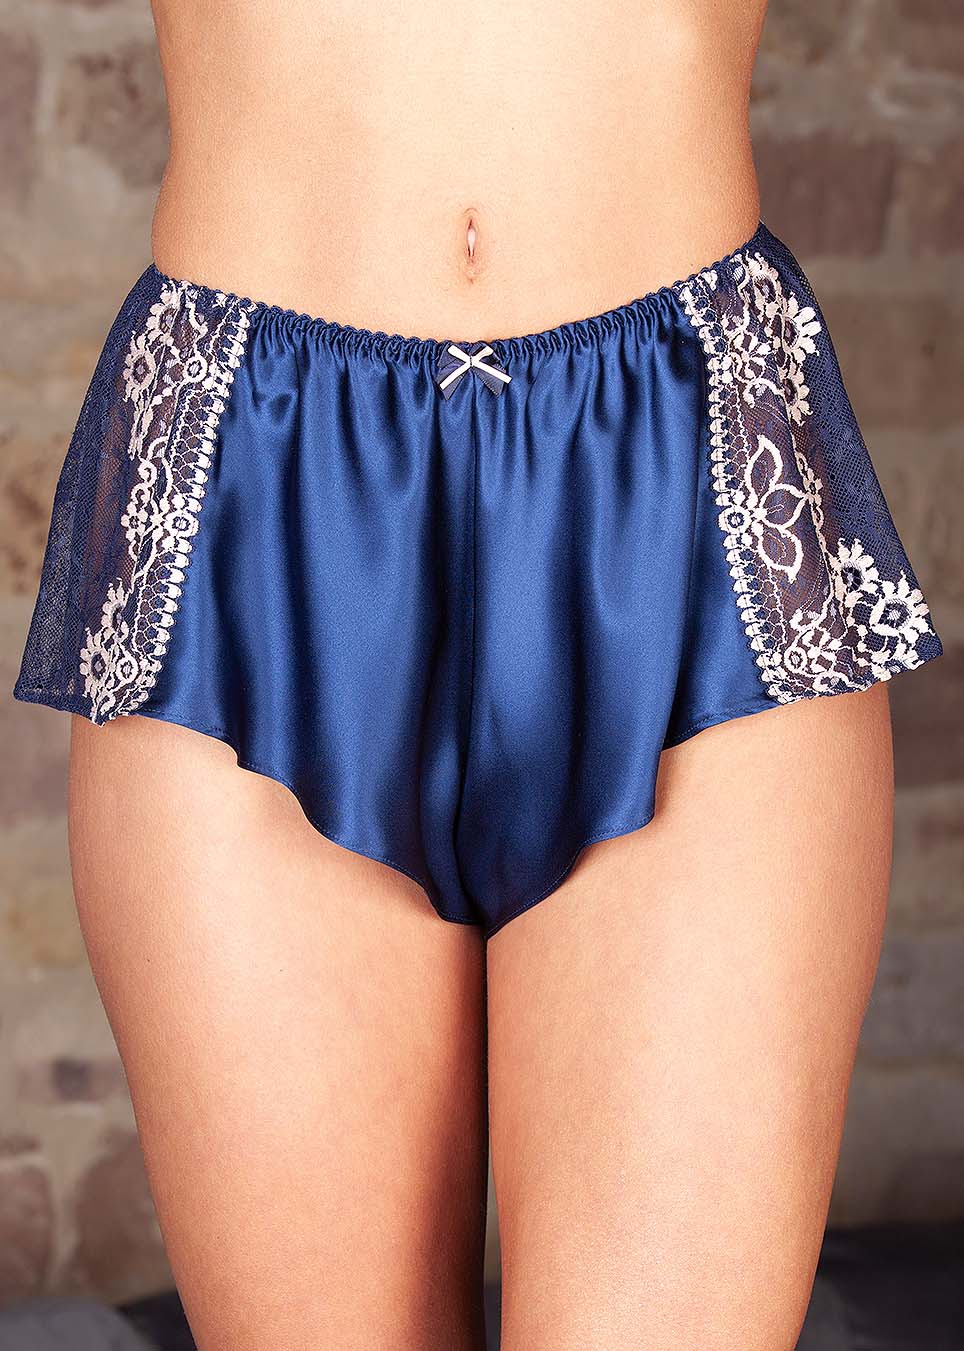 Midnight silk French knickers